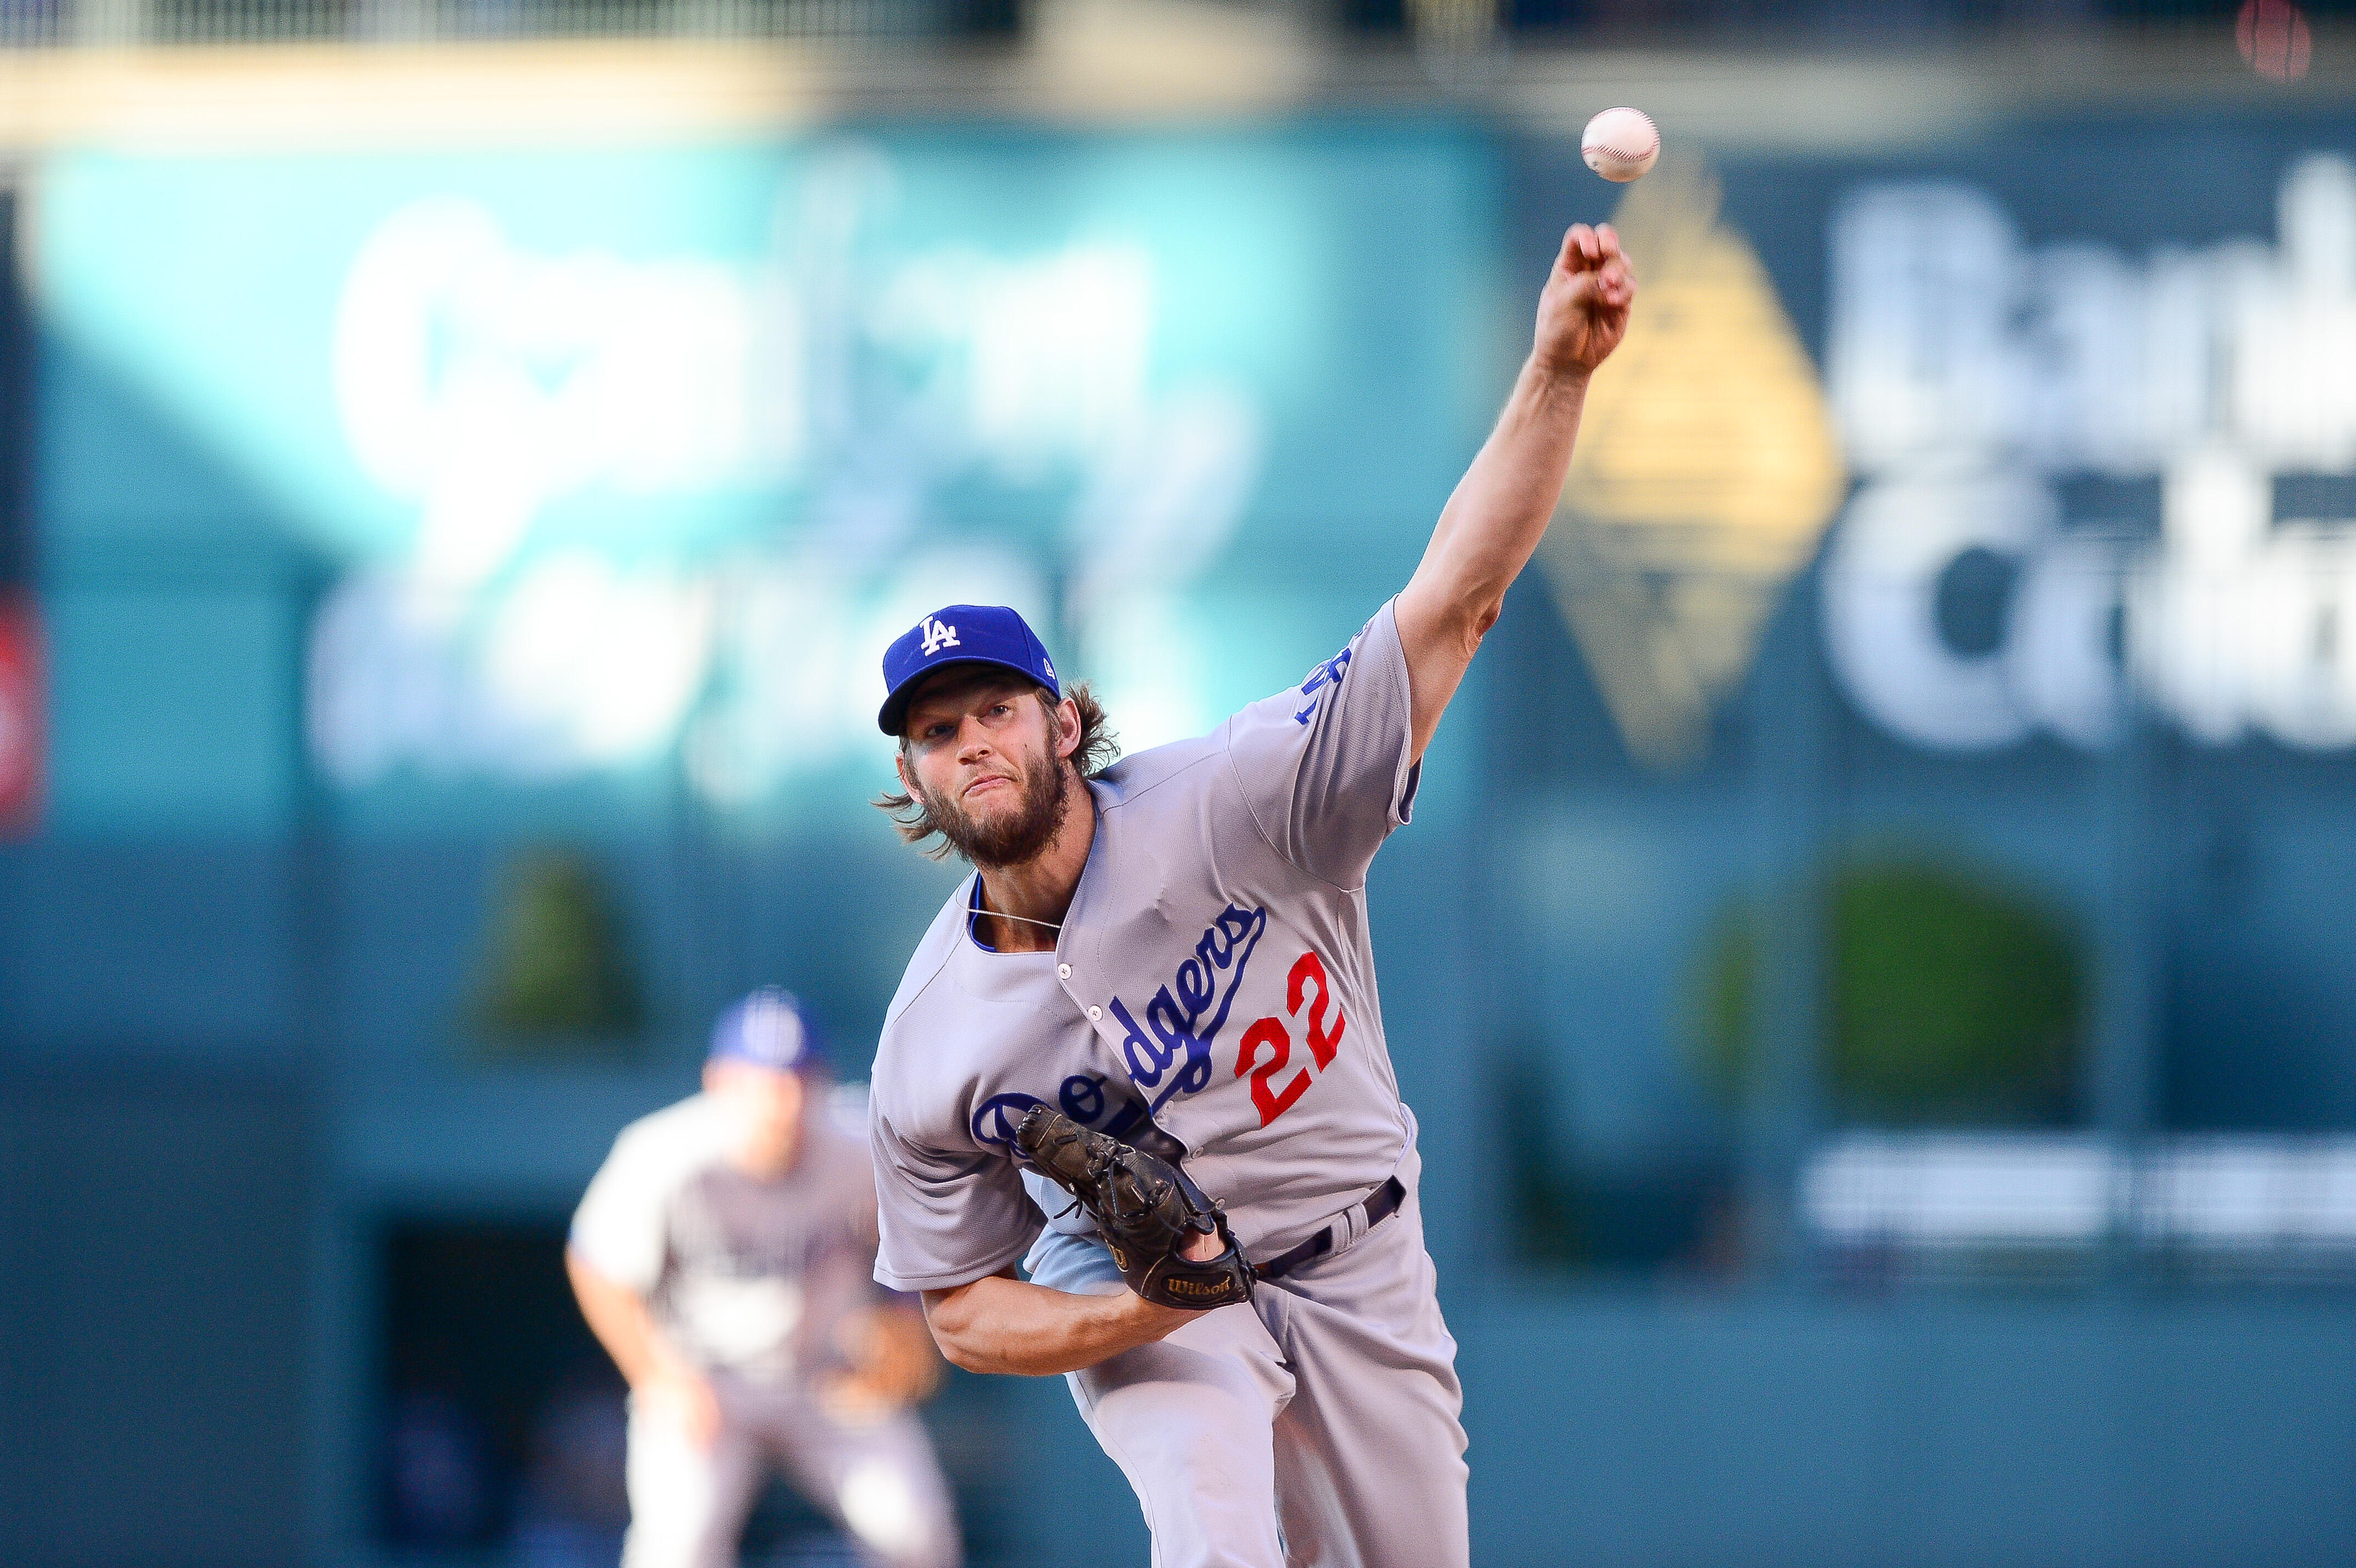 DENVER, CO - MAY 12: Clayton Kershaw #22 of the Los Angeles Dodgers pitches against the Colorado Rockies in the first inning of a game at Coors Field on May 12, 2017 in Denver, Colorado.  (Photo by Dustin Bradford/Getty Images)